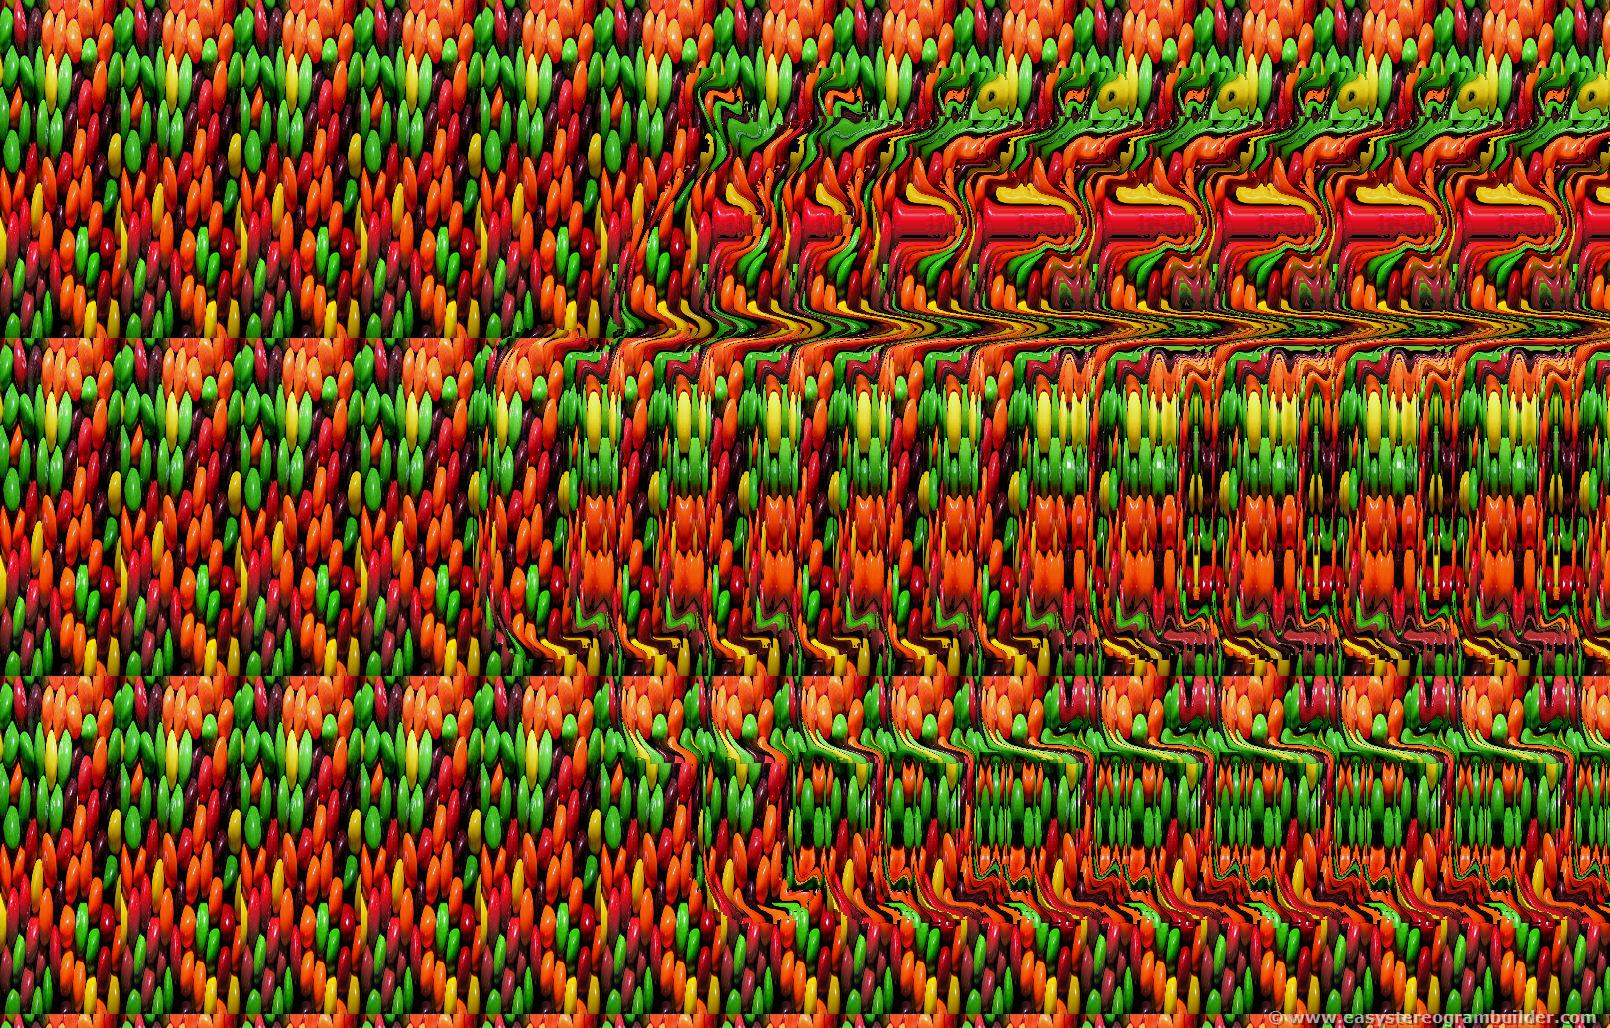 3D Stereogram Images   Widescreen HD Wallpapers